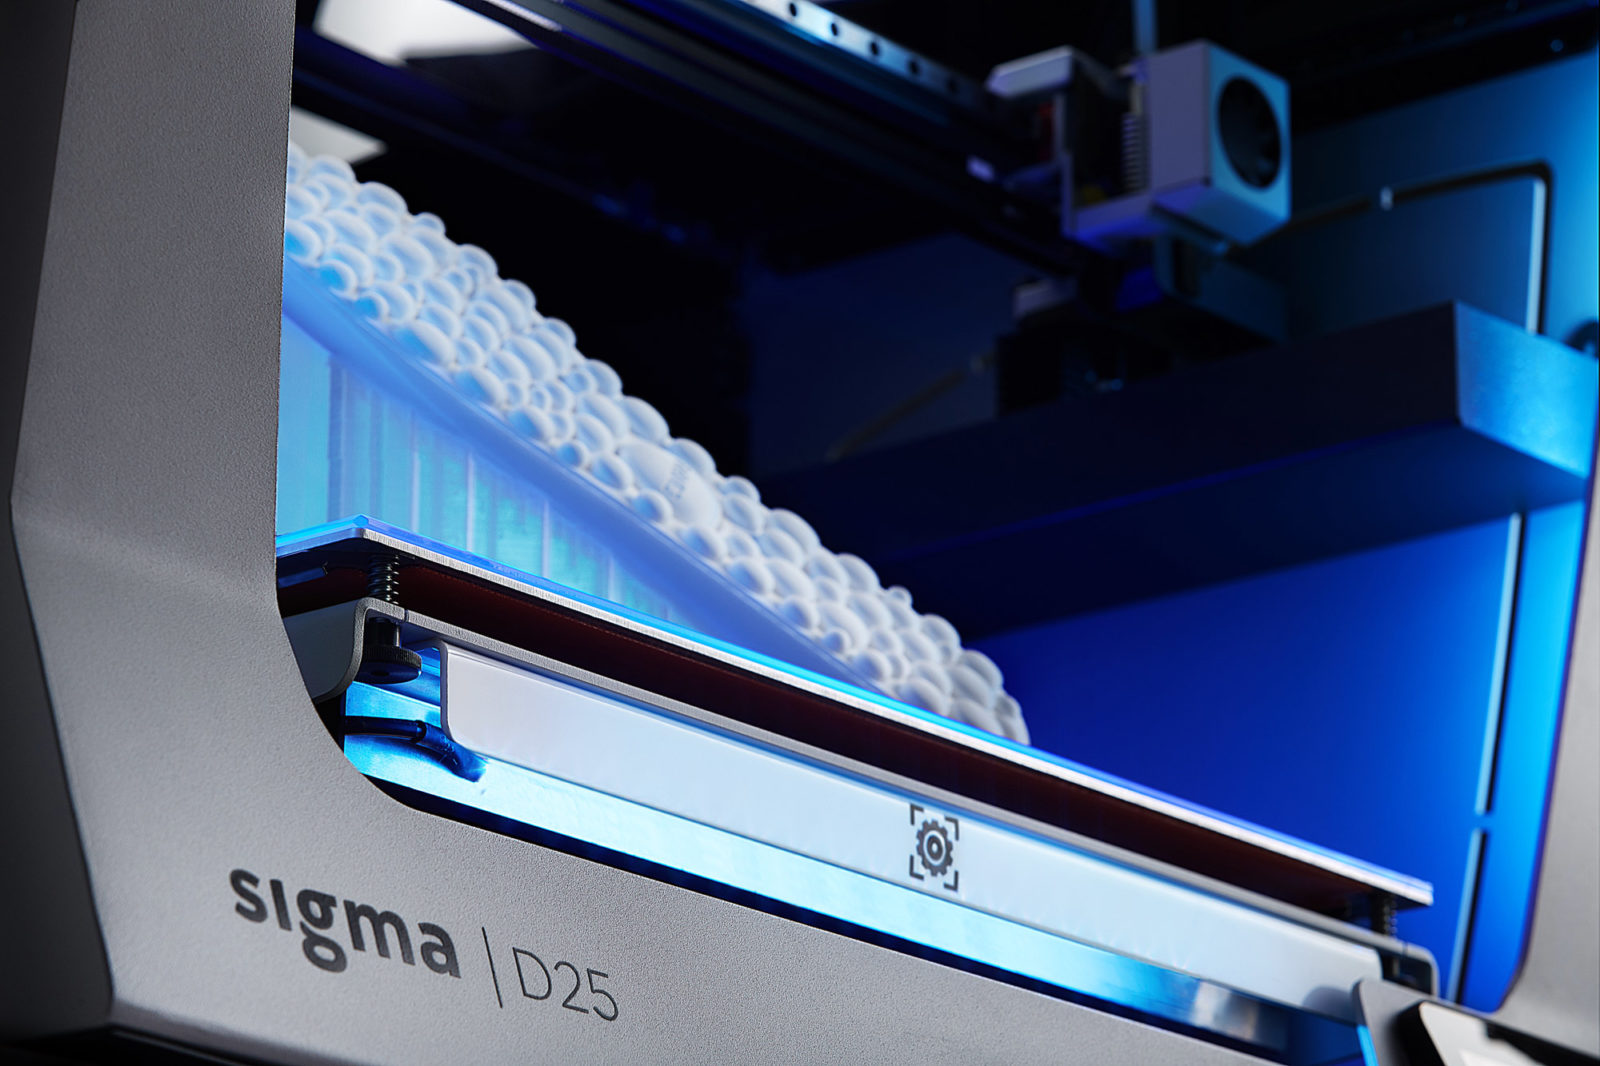 BCN3D Sigma D25 3D Printer IDEX dual extrusion water soluble PVA supports